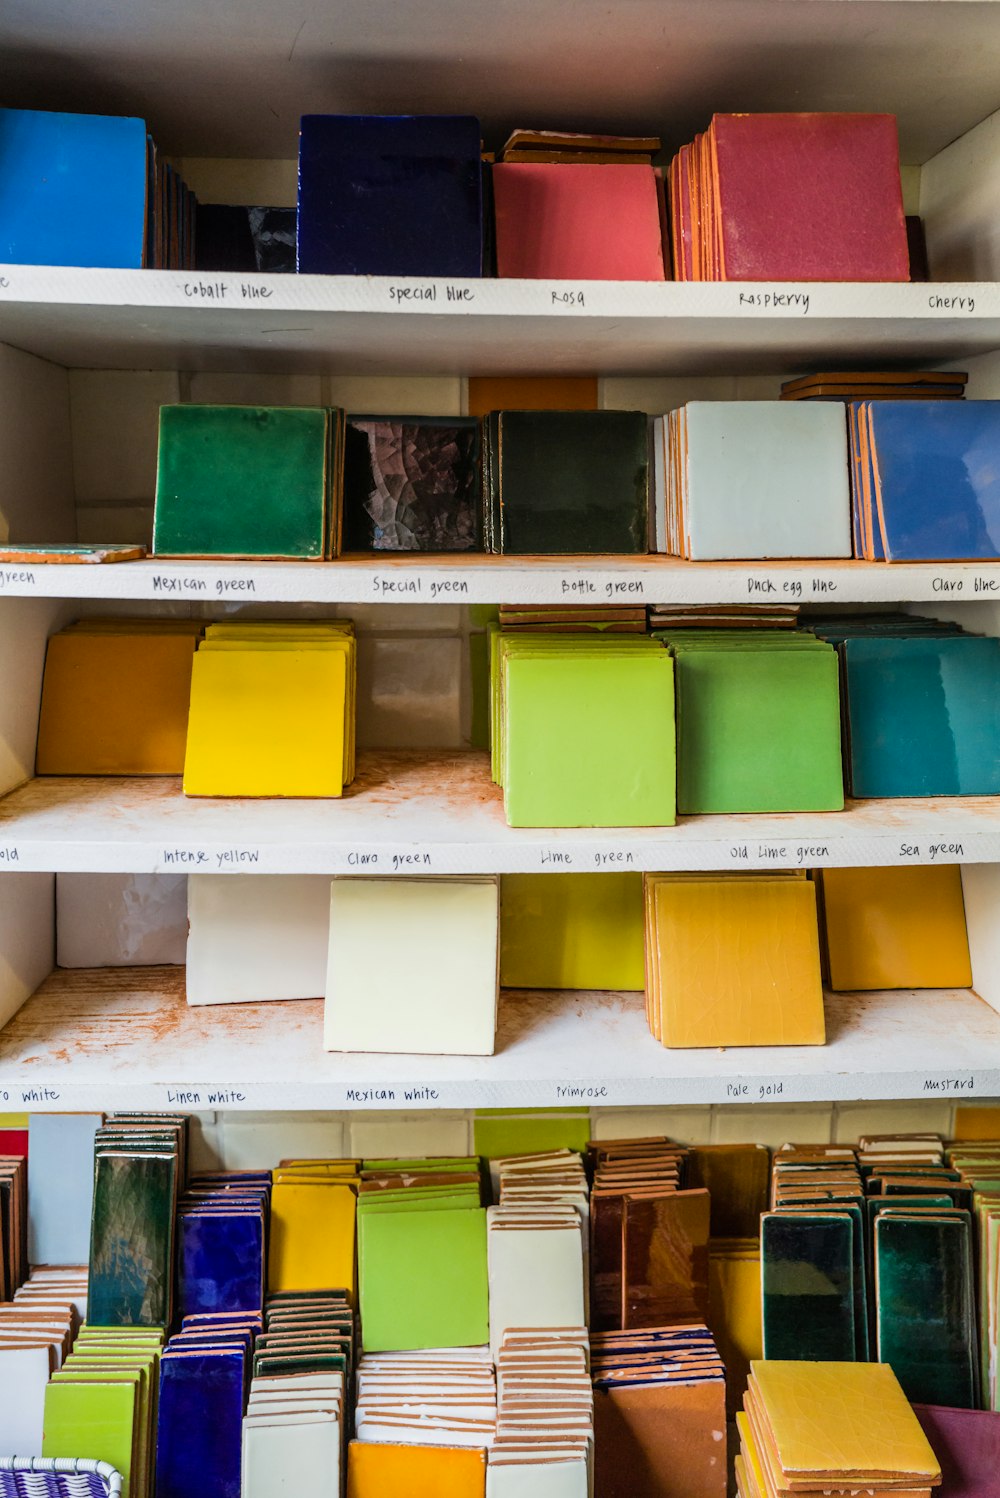 a shelf filled with lots of different colored boxes